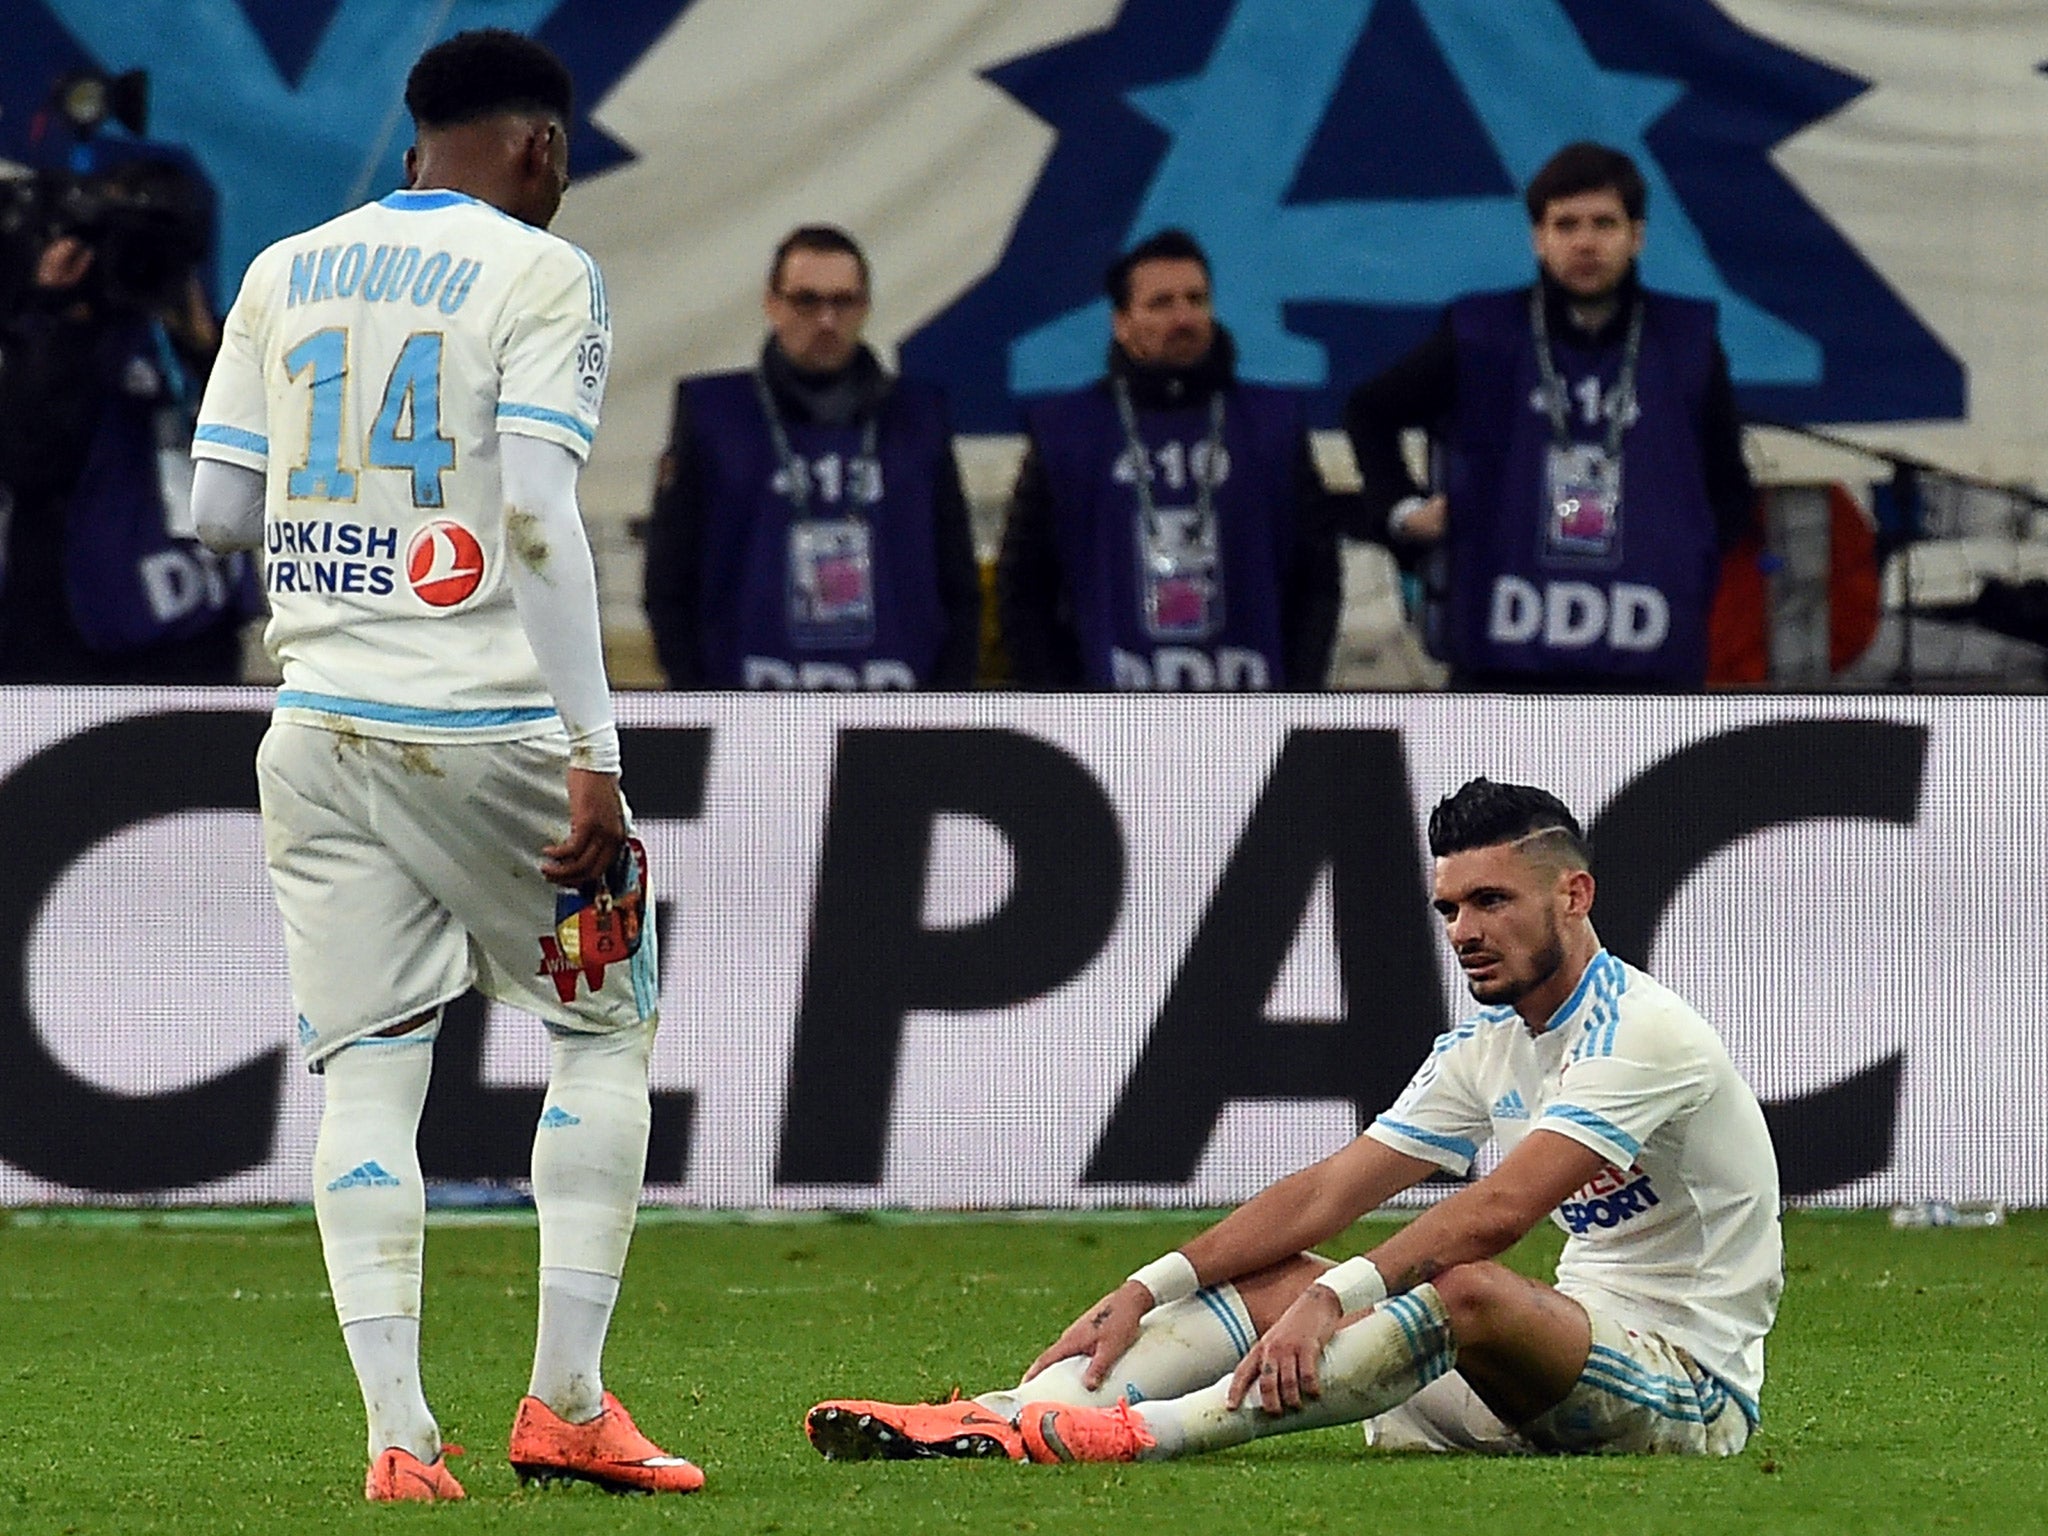 Georges-Kevin Nkoudou and Remy Cabella look dejected after Marseille's loss to PSG